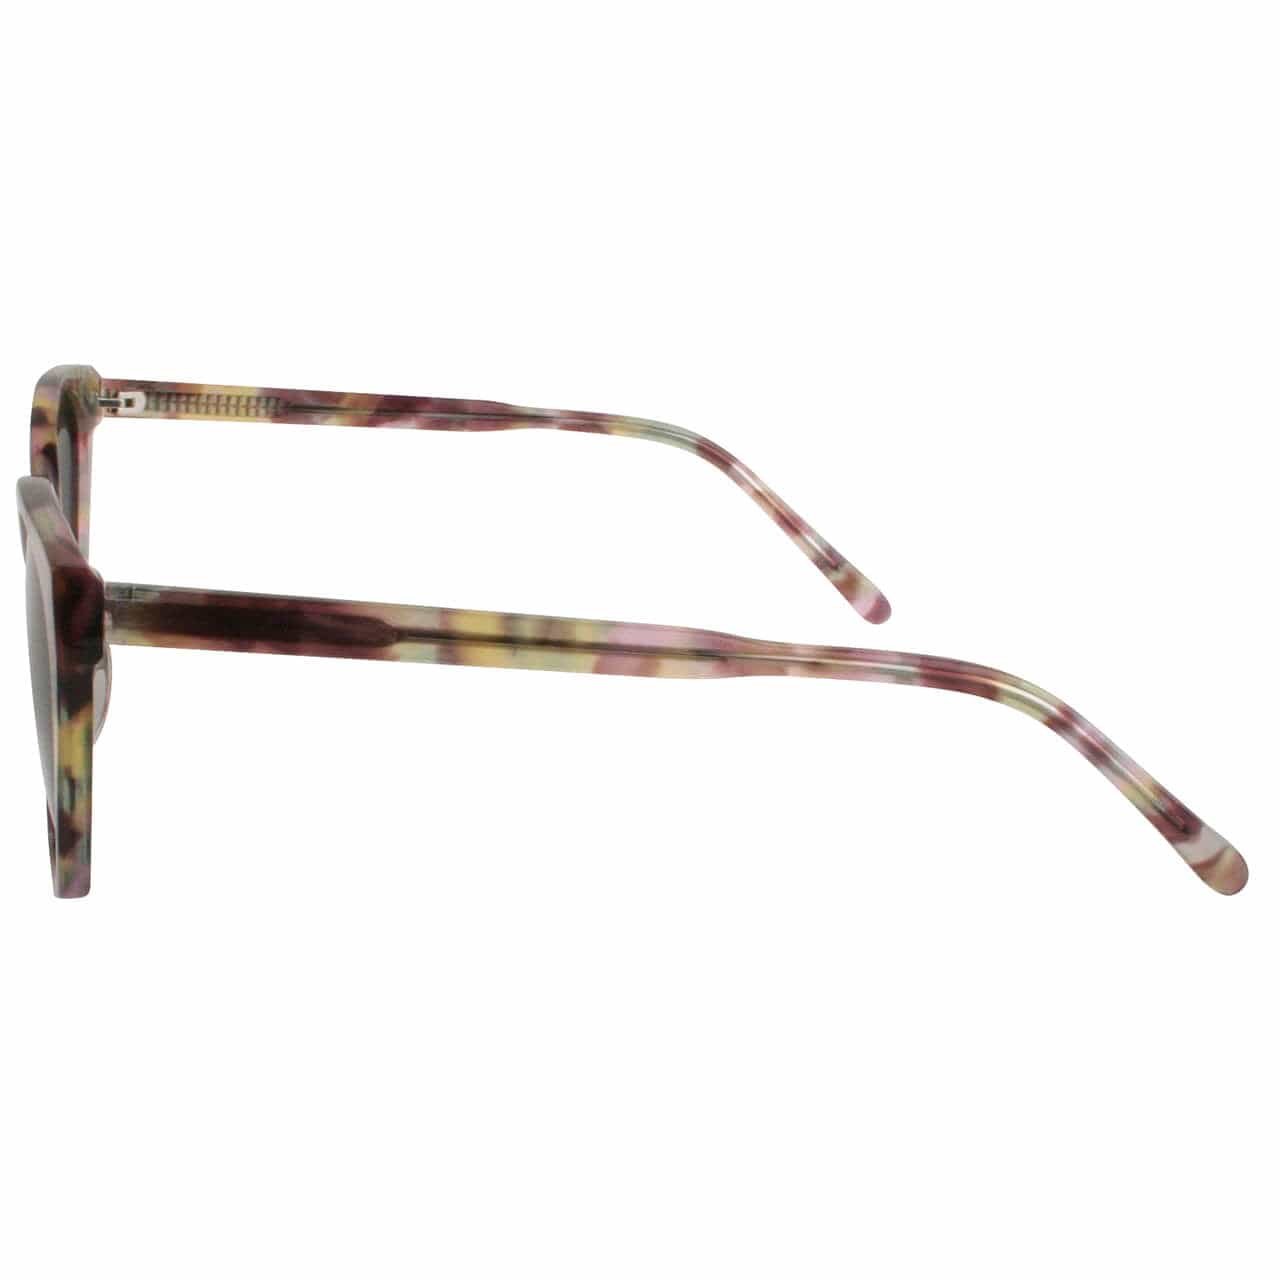 Solect Hydro Sunglasses with Tortoise Pink Frame and Gray Polarized Lenses Side View